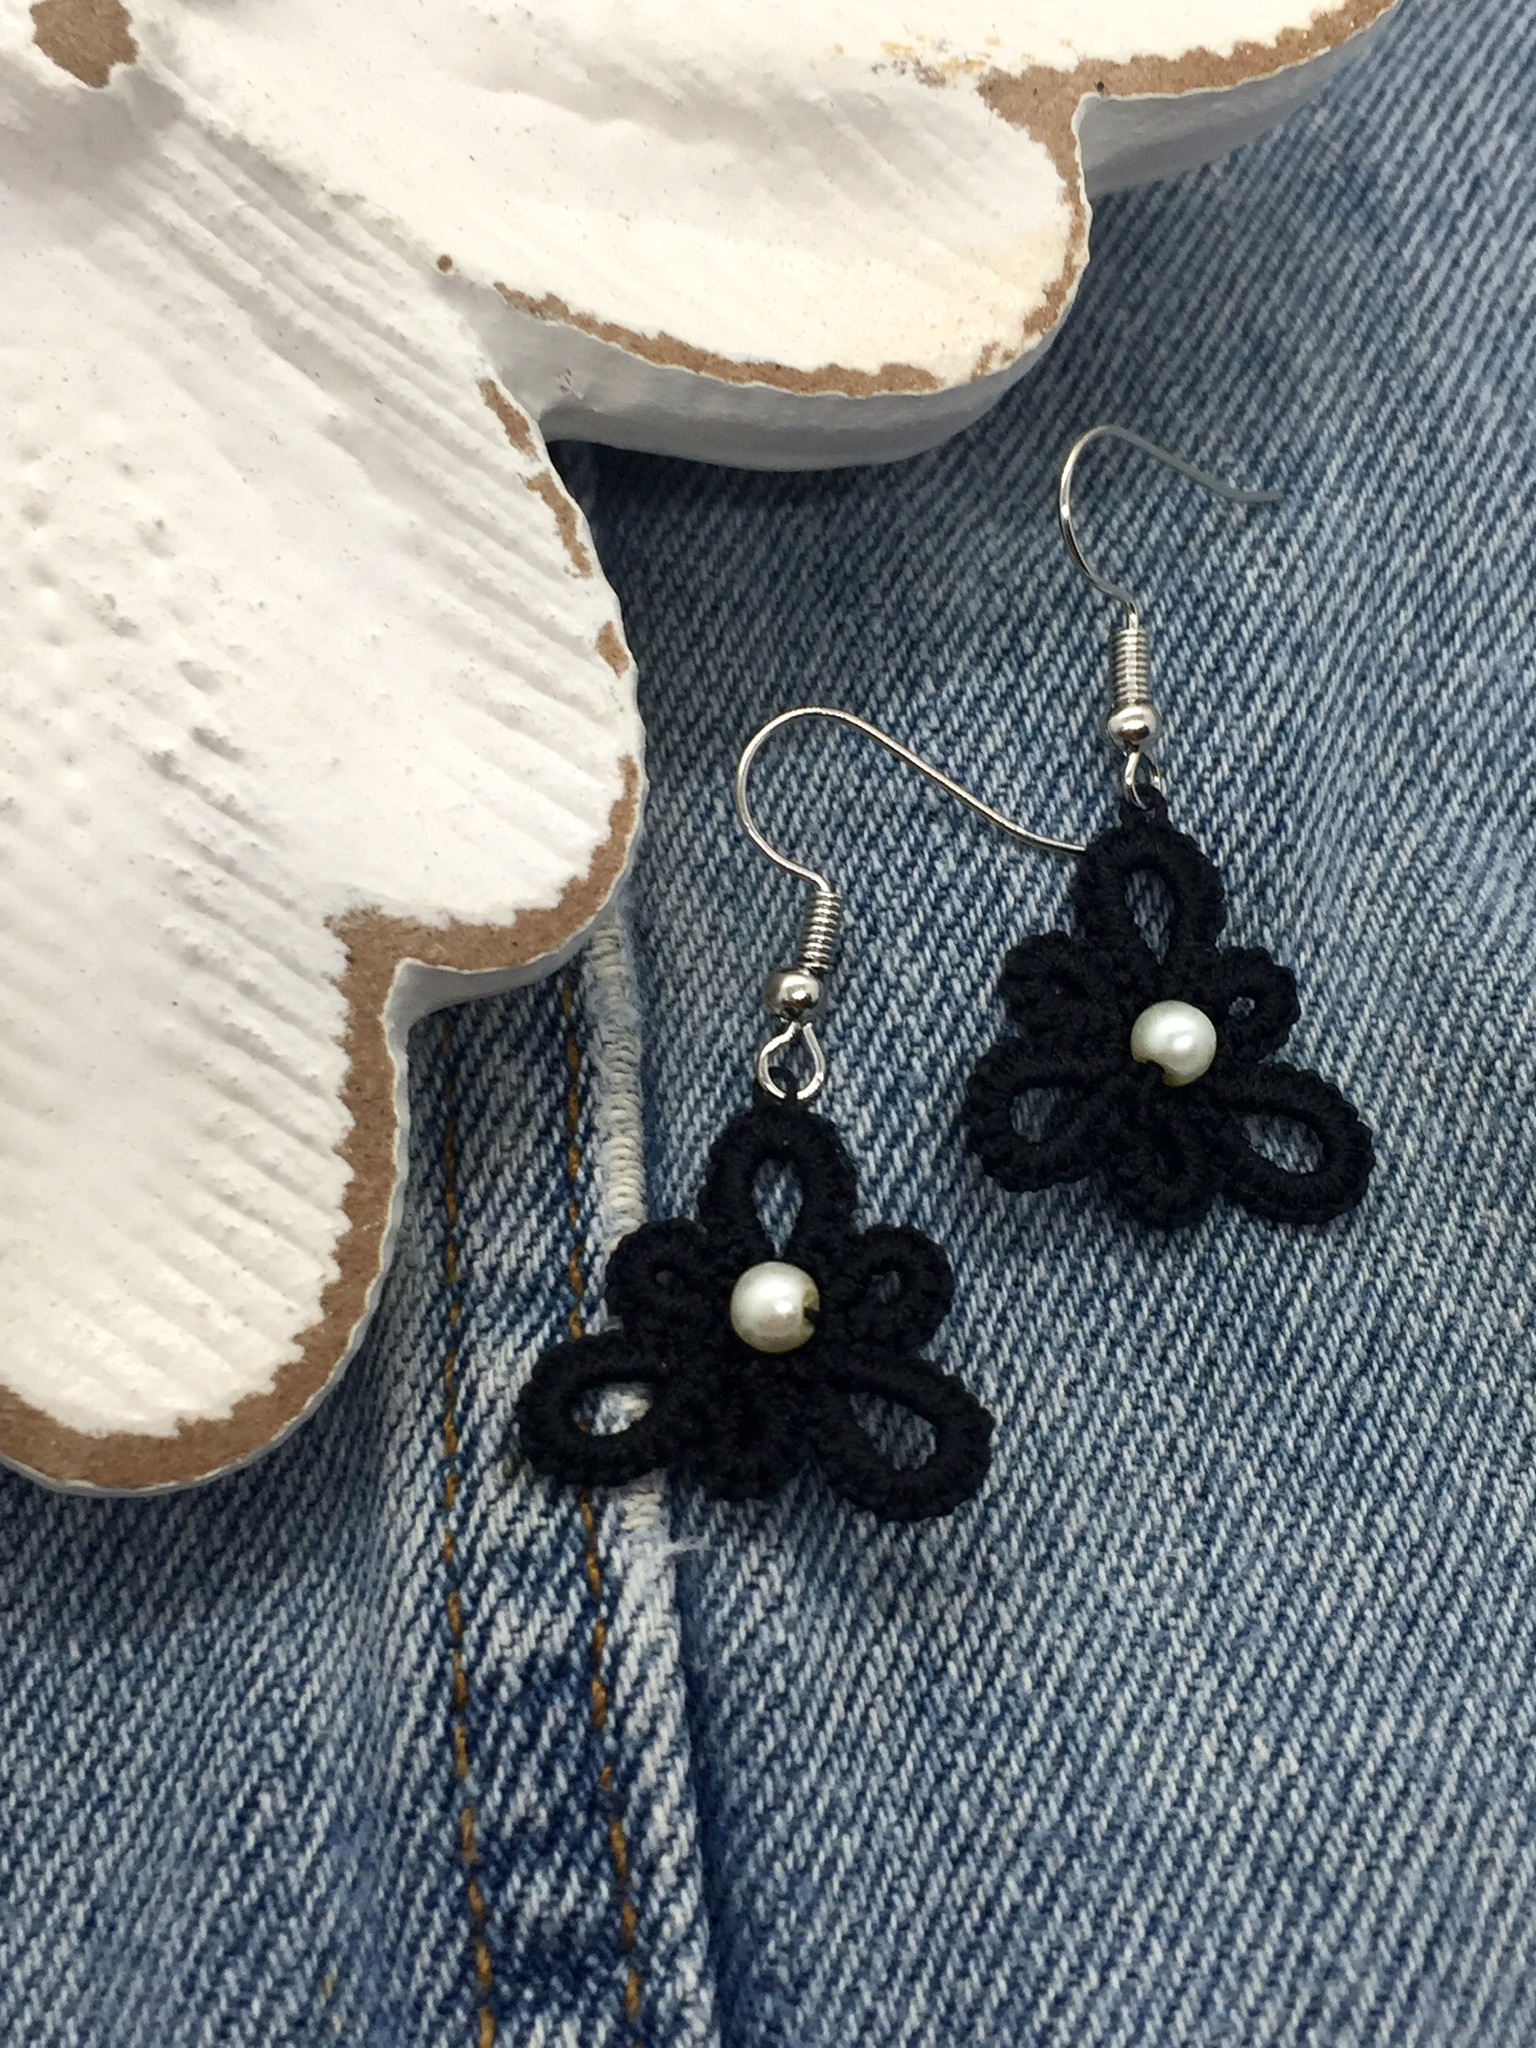 Small triangle shaped black earrings with pearl center